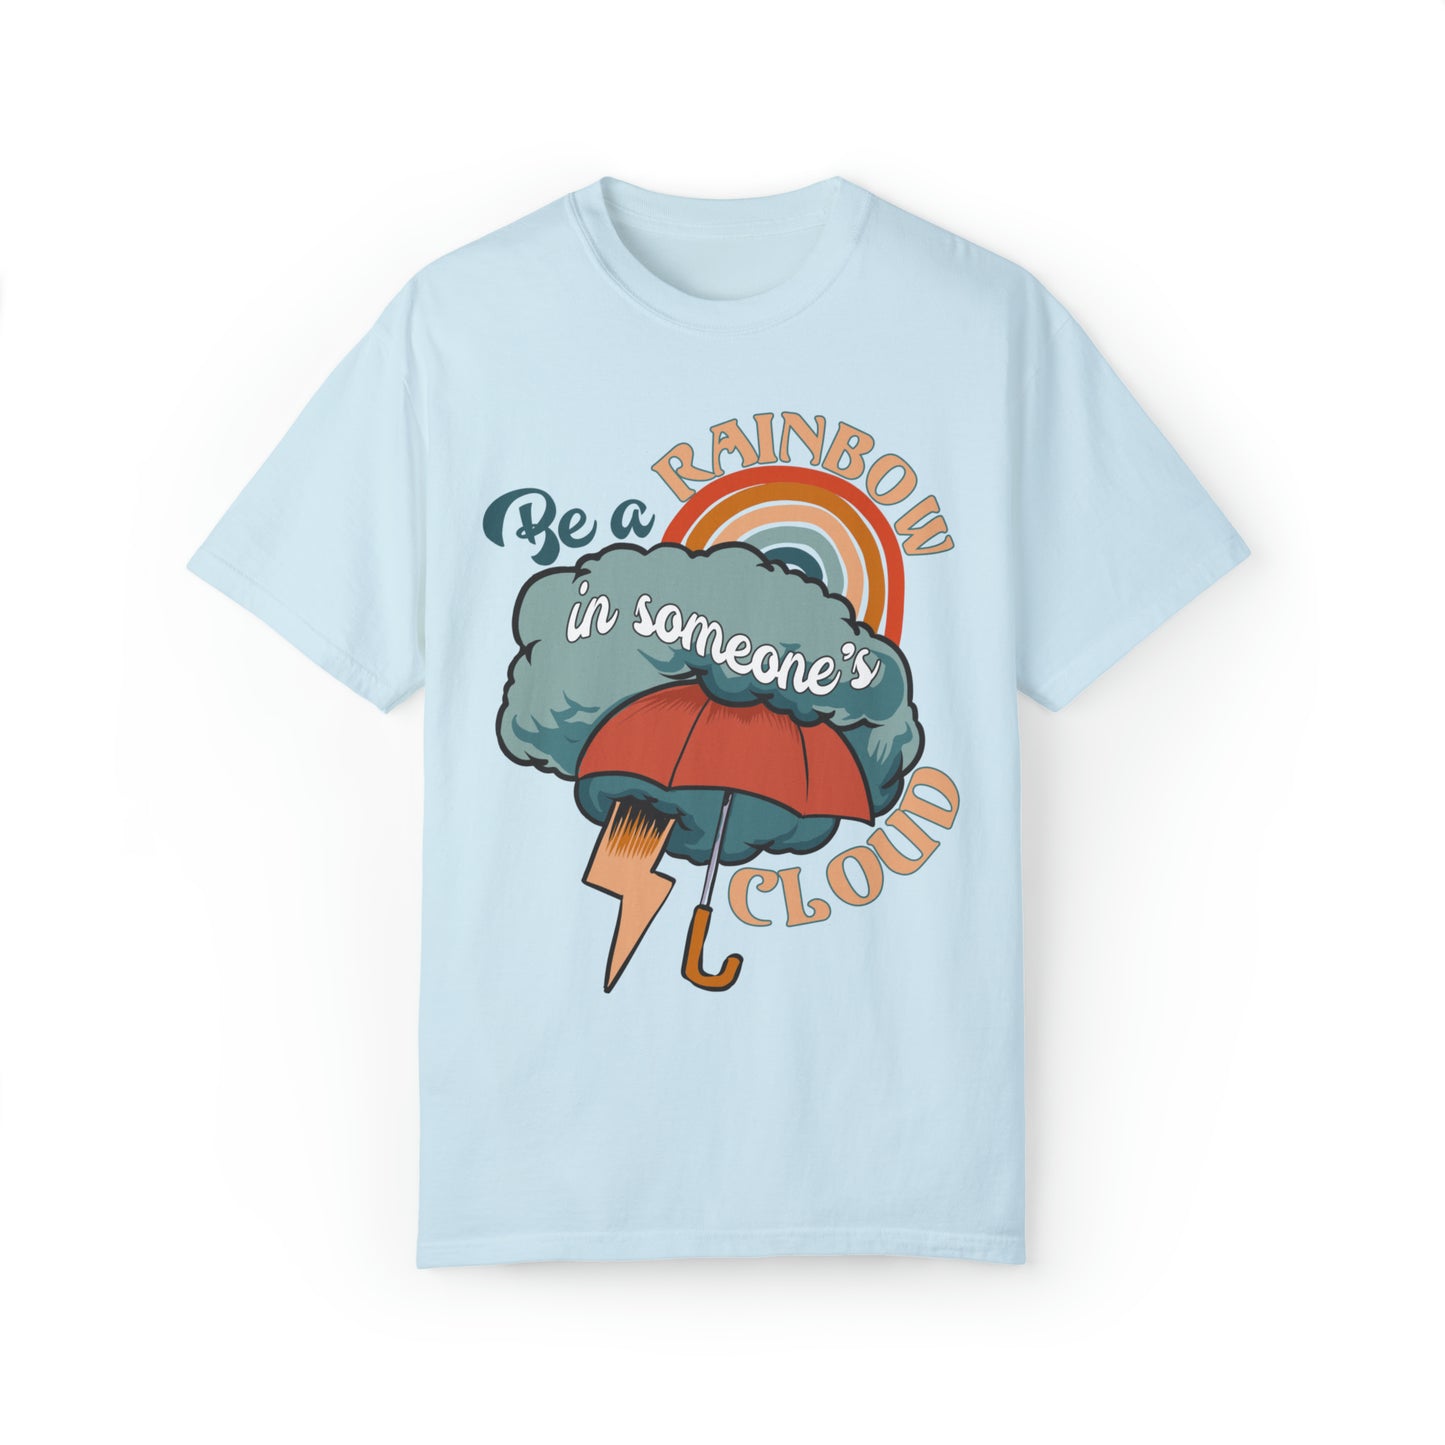 "Be a Rainbow in Someone's Cloud" Comfort Colors Oversized T-shirt